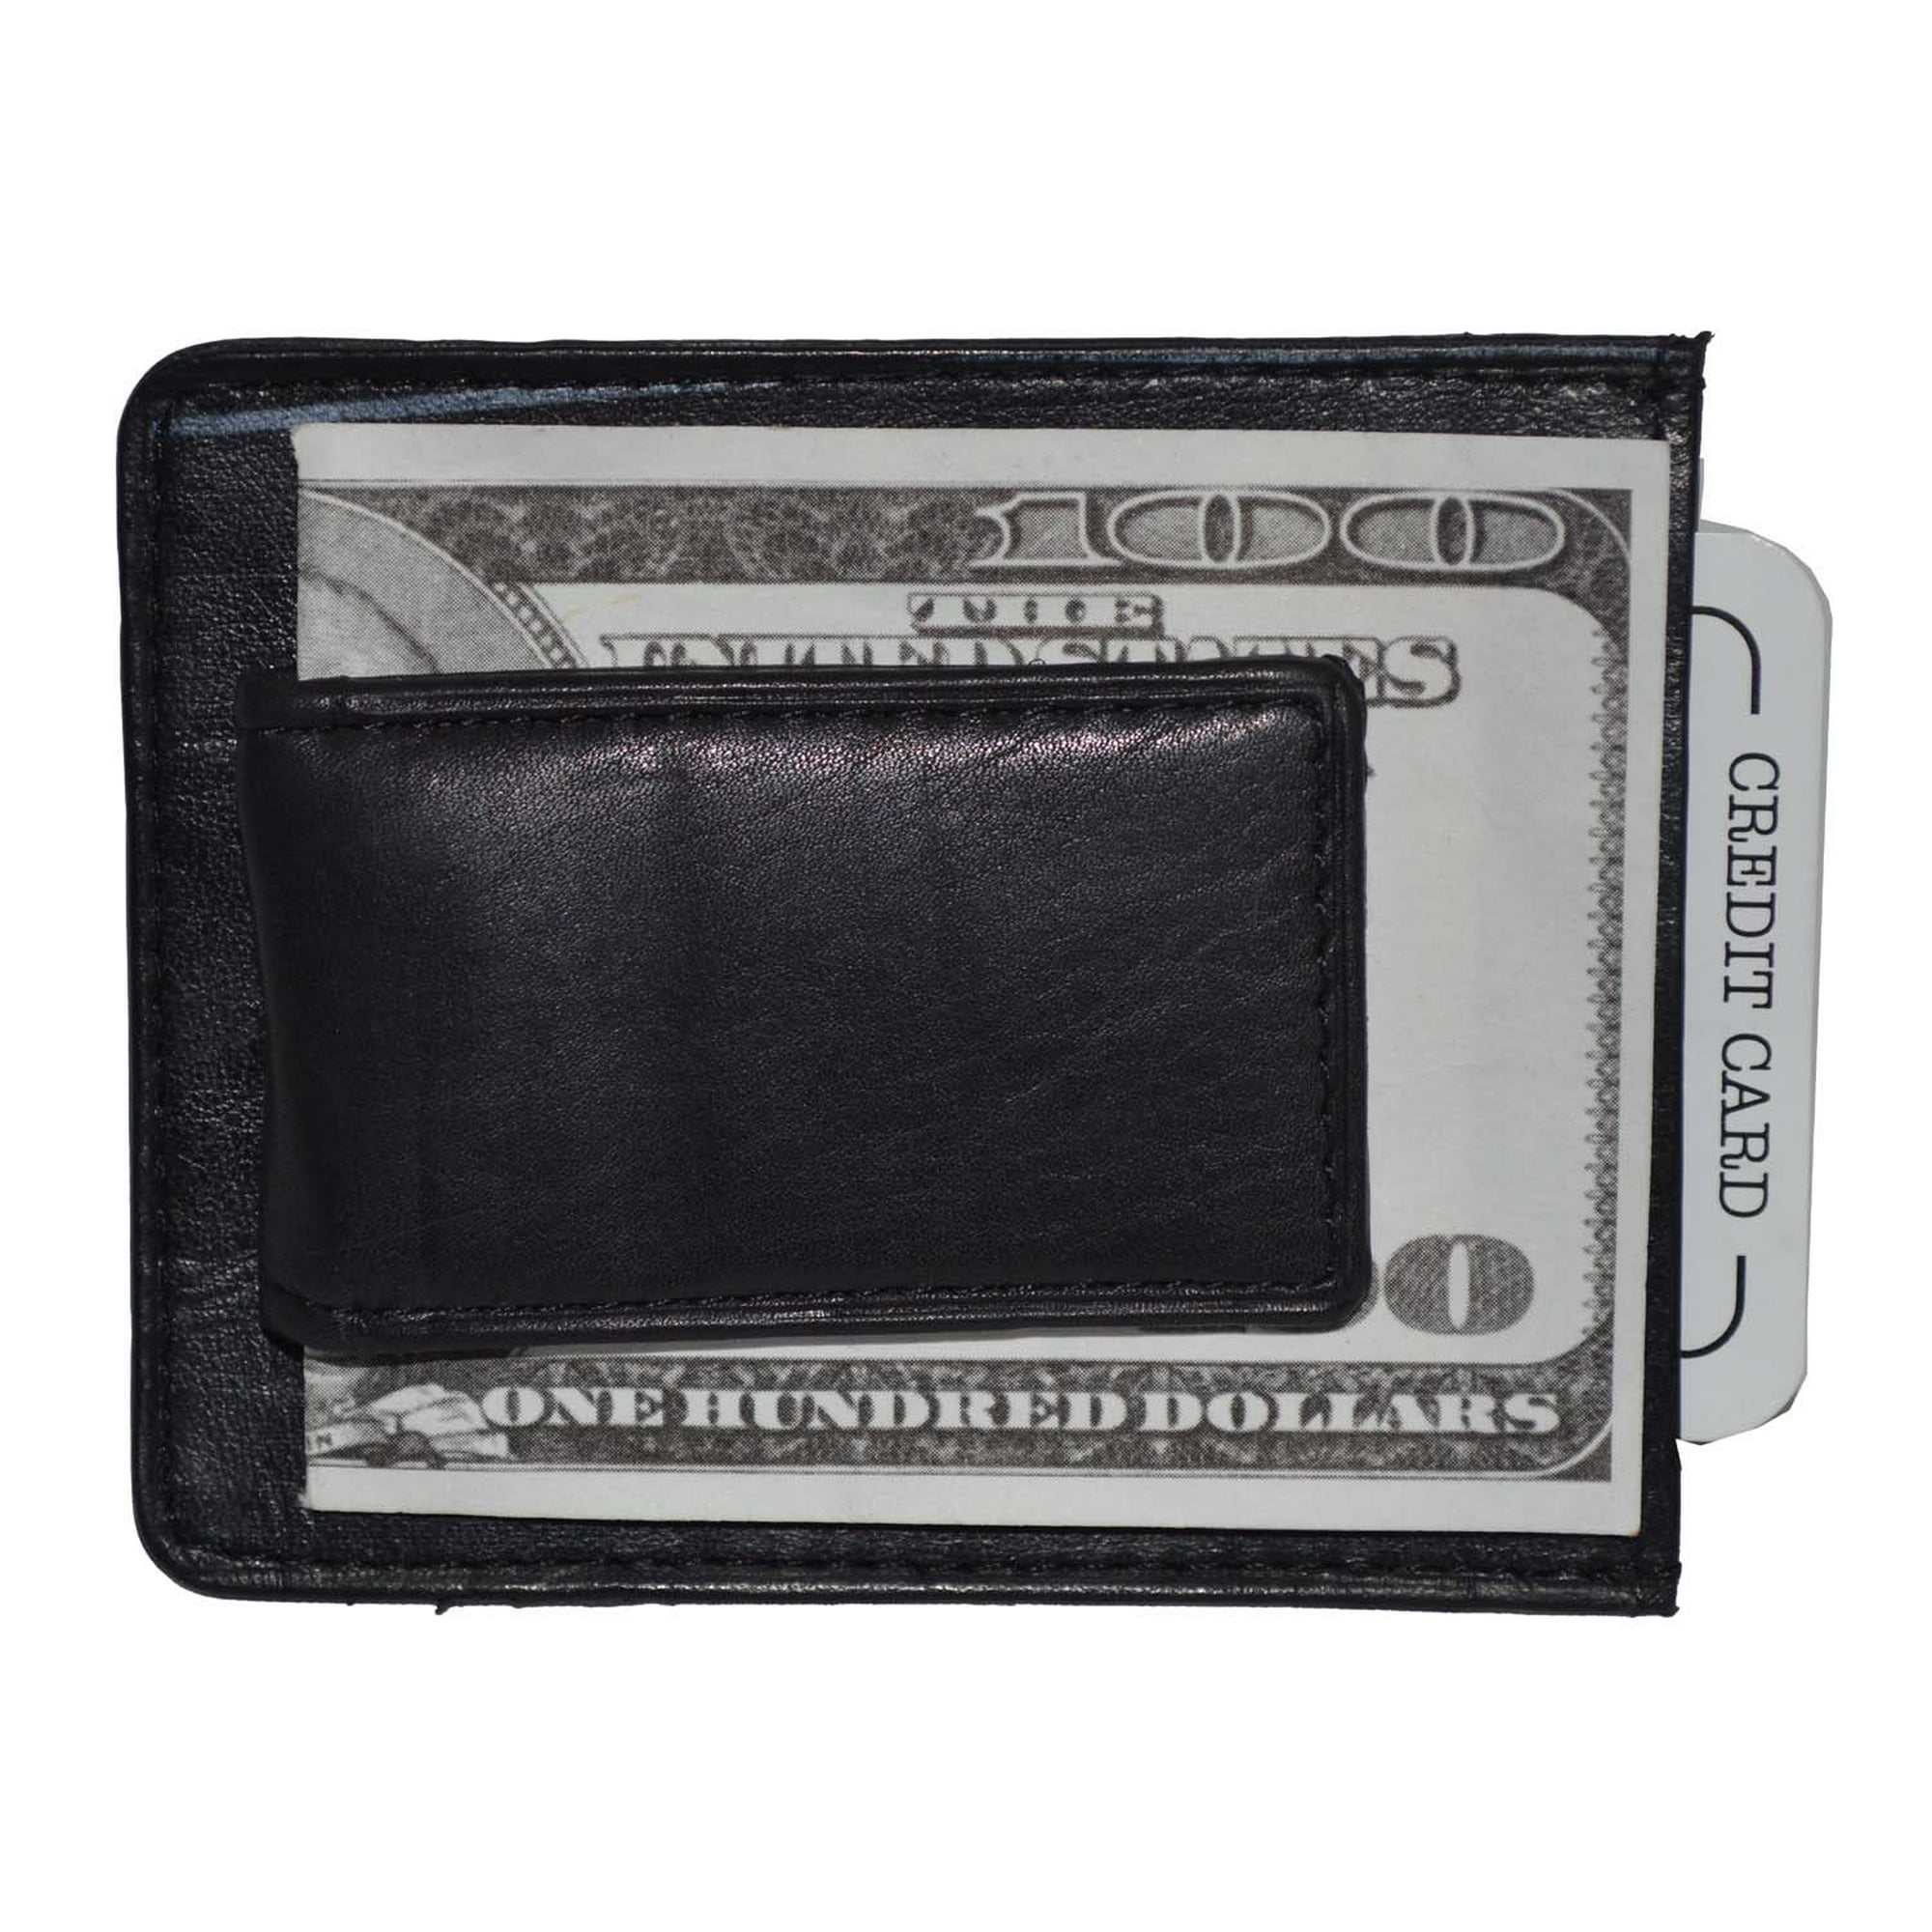 Magnetic Money Clip Wallet with a Credit Card Pocket by Leatherboss